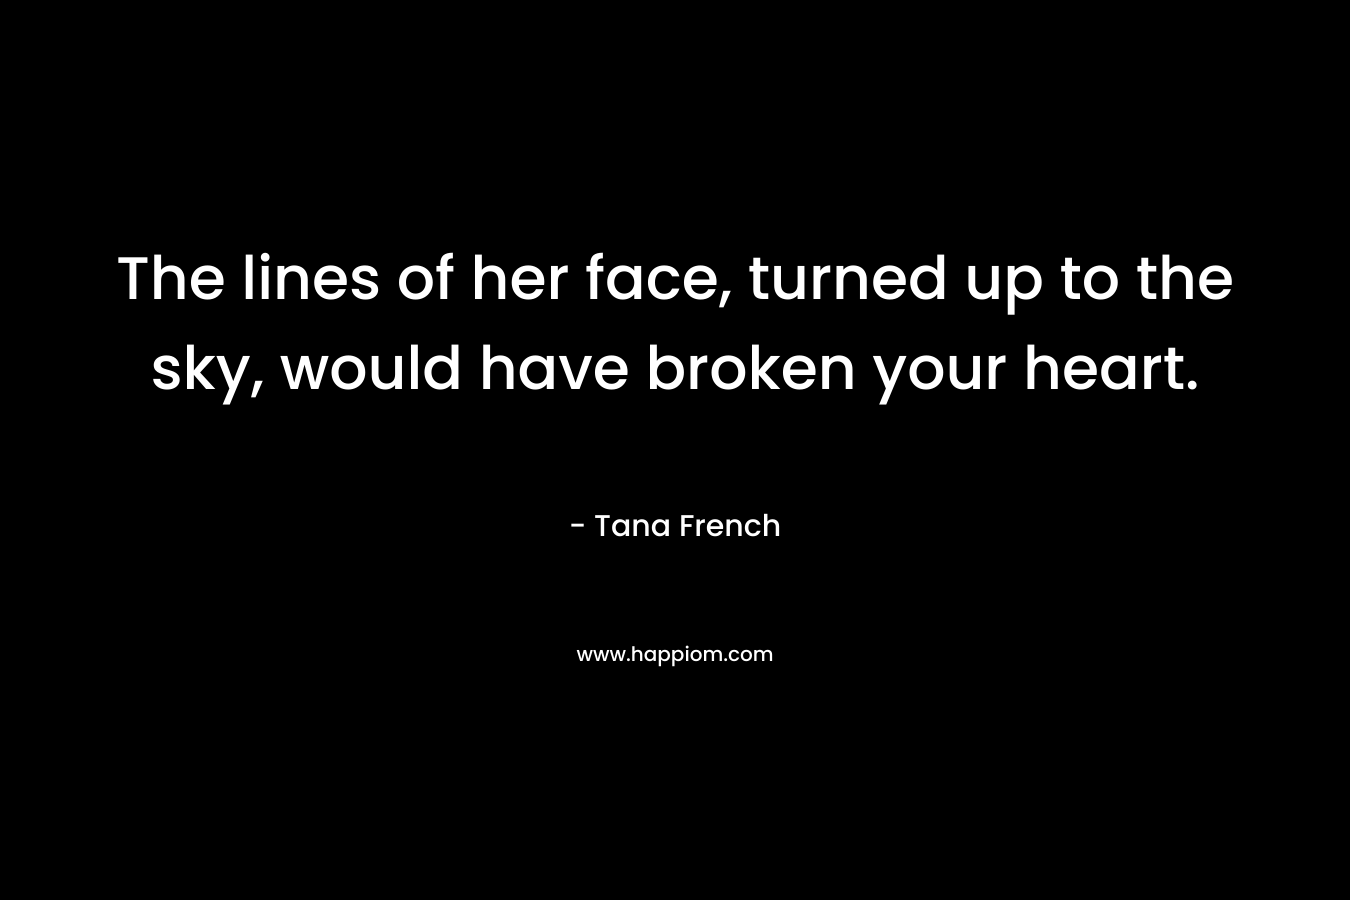 The lines of her face, turned up to the sky, would have broken your heart.